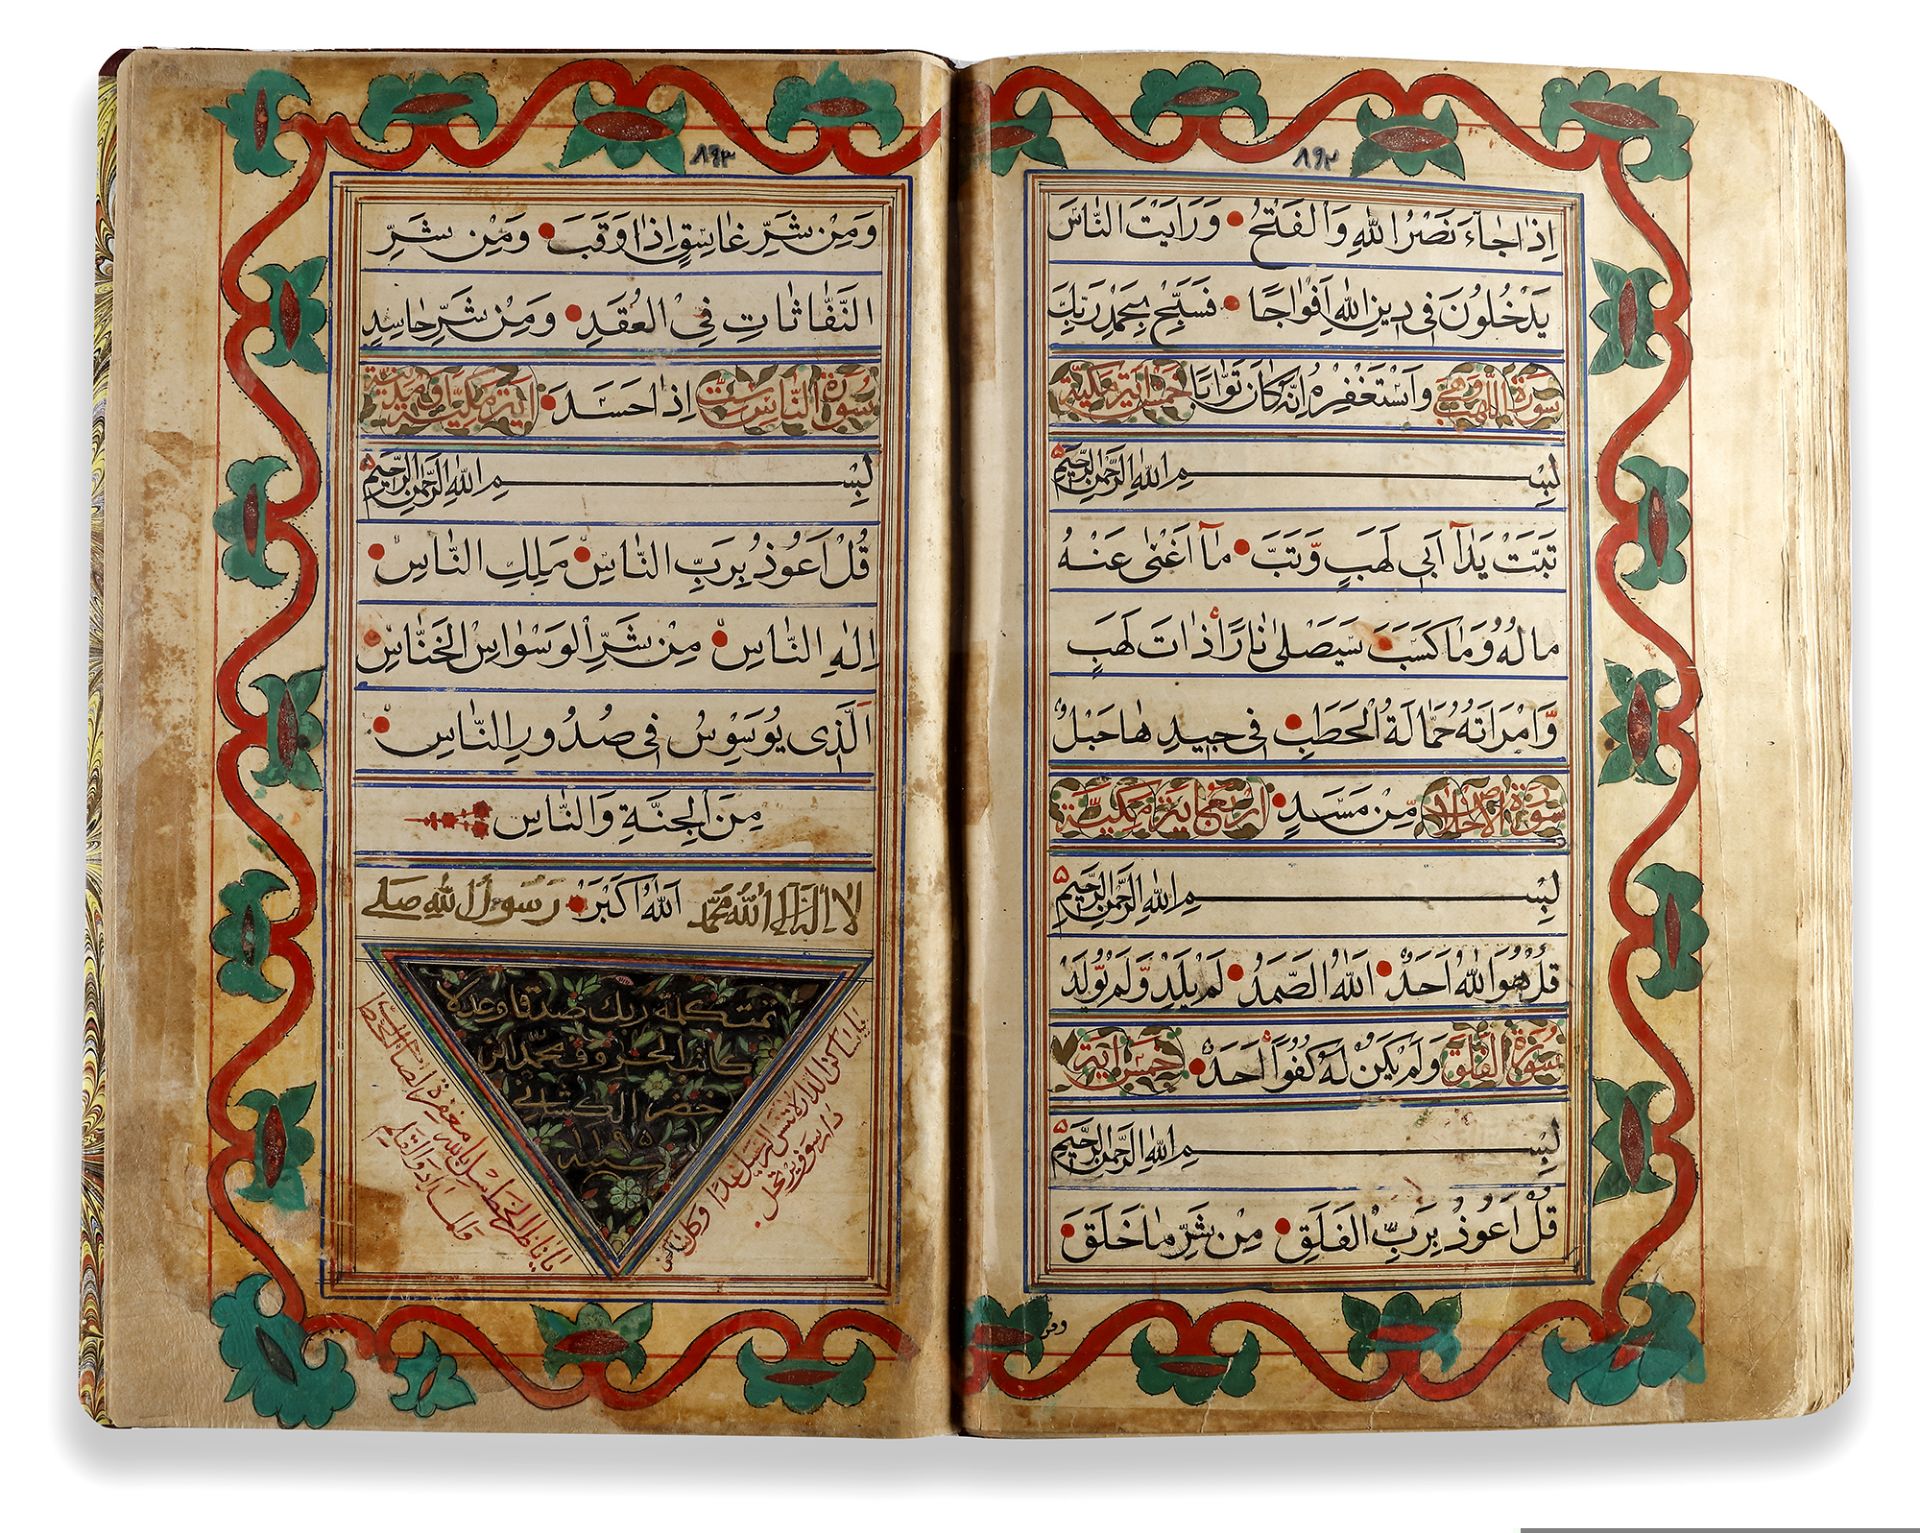 A LARGE QURAN, CENTRAL-ASIA, DAGESTAN, BY MUHHAMAD BIN KHEDR AL-KESHANI IN 1195 AH/1780 AD - Image 6 of 9